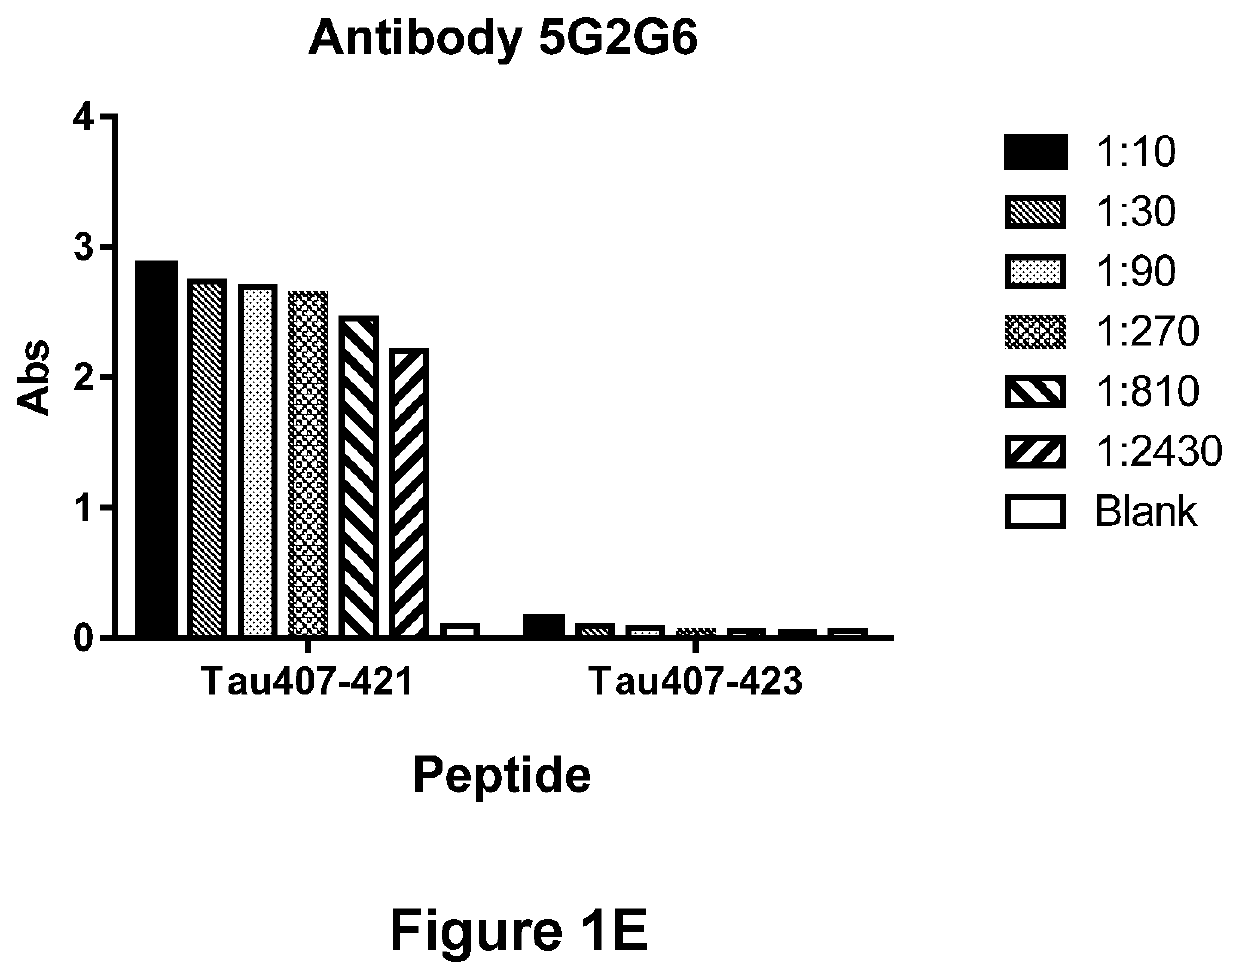 Antibody-based molecules specific for the truncated ASP421 epitope of Tau and their uses in the diagnosis and treatment of tauopathy